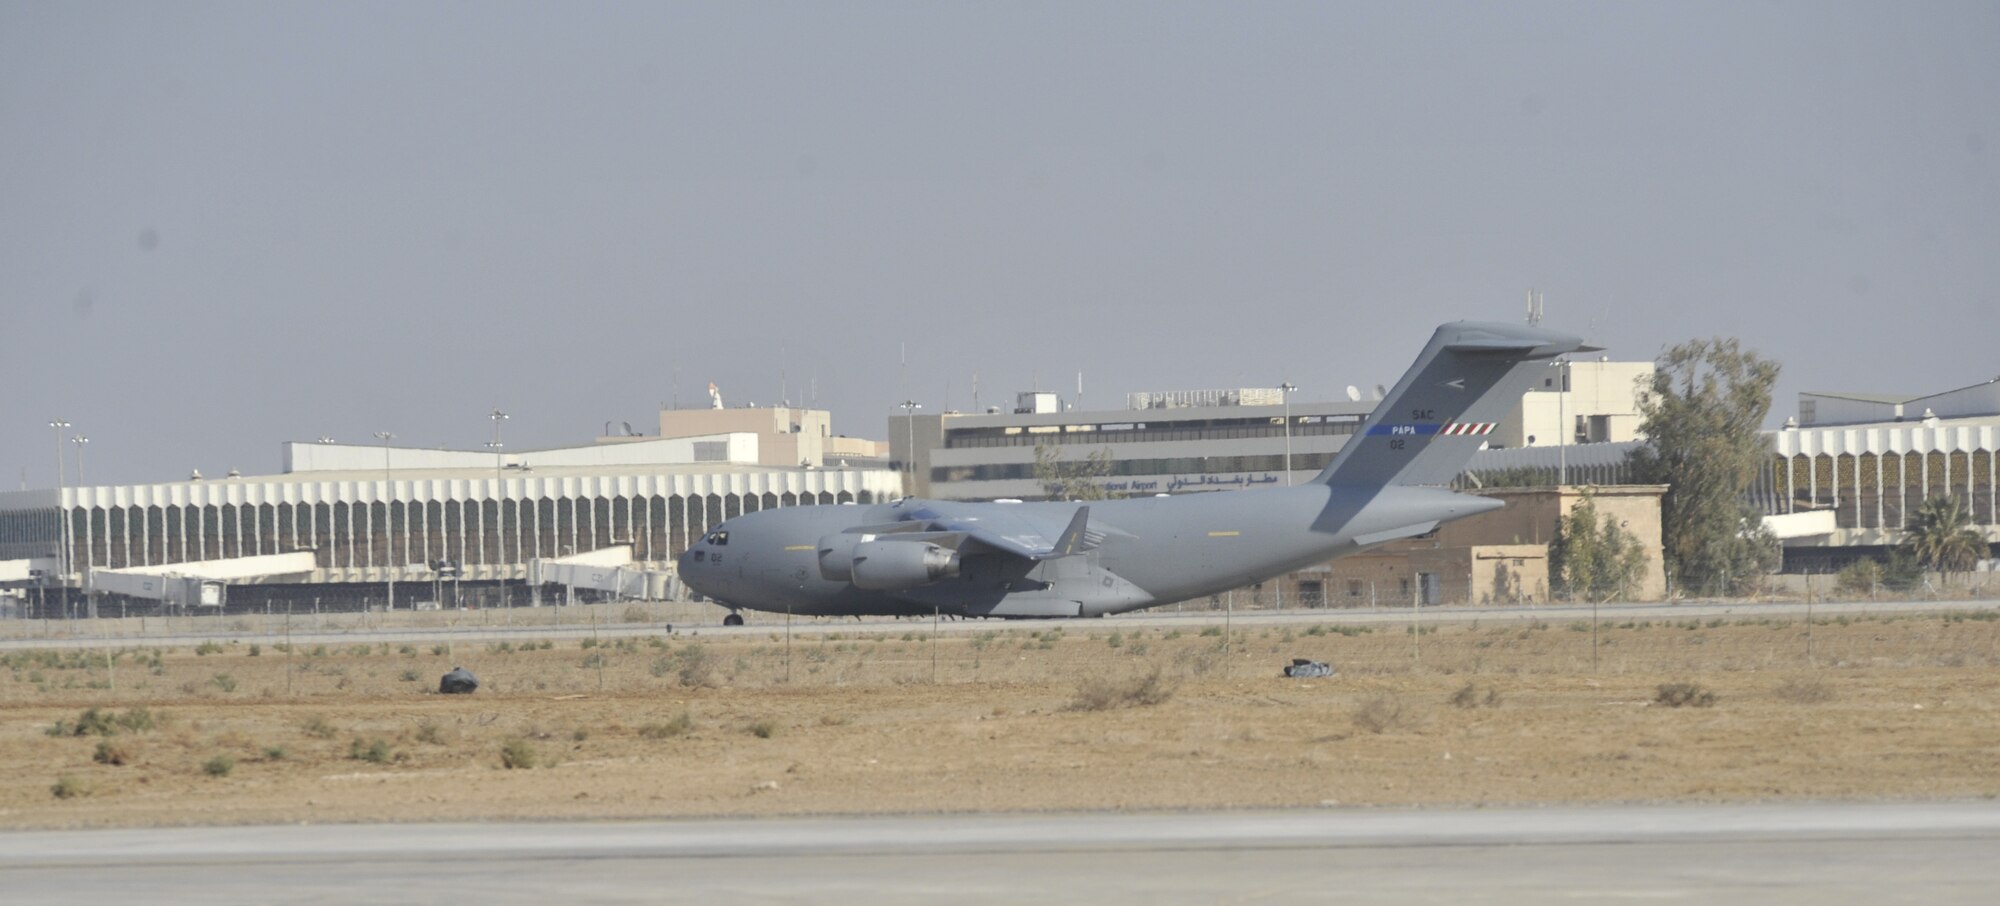 A C-17 from the multinational Heavy Airlift Wing based at Papa Air Base, Hungary  taxis past the terminal at Baghdad International Airport. The airlift into Iraq was a first by the wing comprised of 12 member nations and facilitated the deployment for members of the NATO Training Mission-Iraq. The wing operates three C-17s and includes NATO member nations Bulgaria, Estonia, Hungary, Lithuania, the Netherlands, Norway, Poland, Romania, Slovenia and the U.S., as well as Partnership for Peace nations Finland and Sweden.